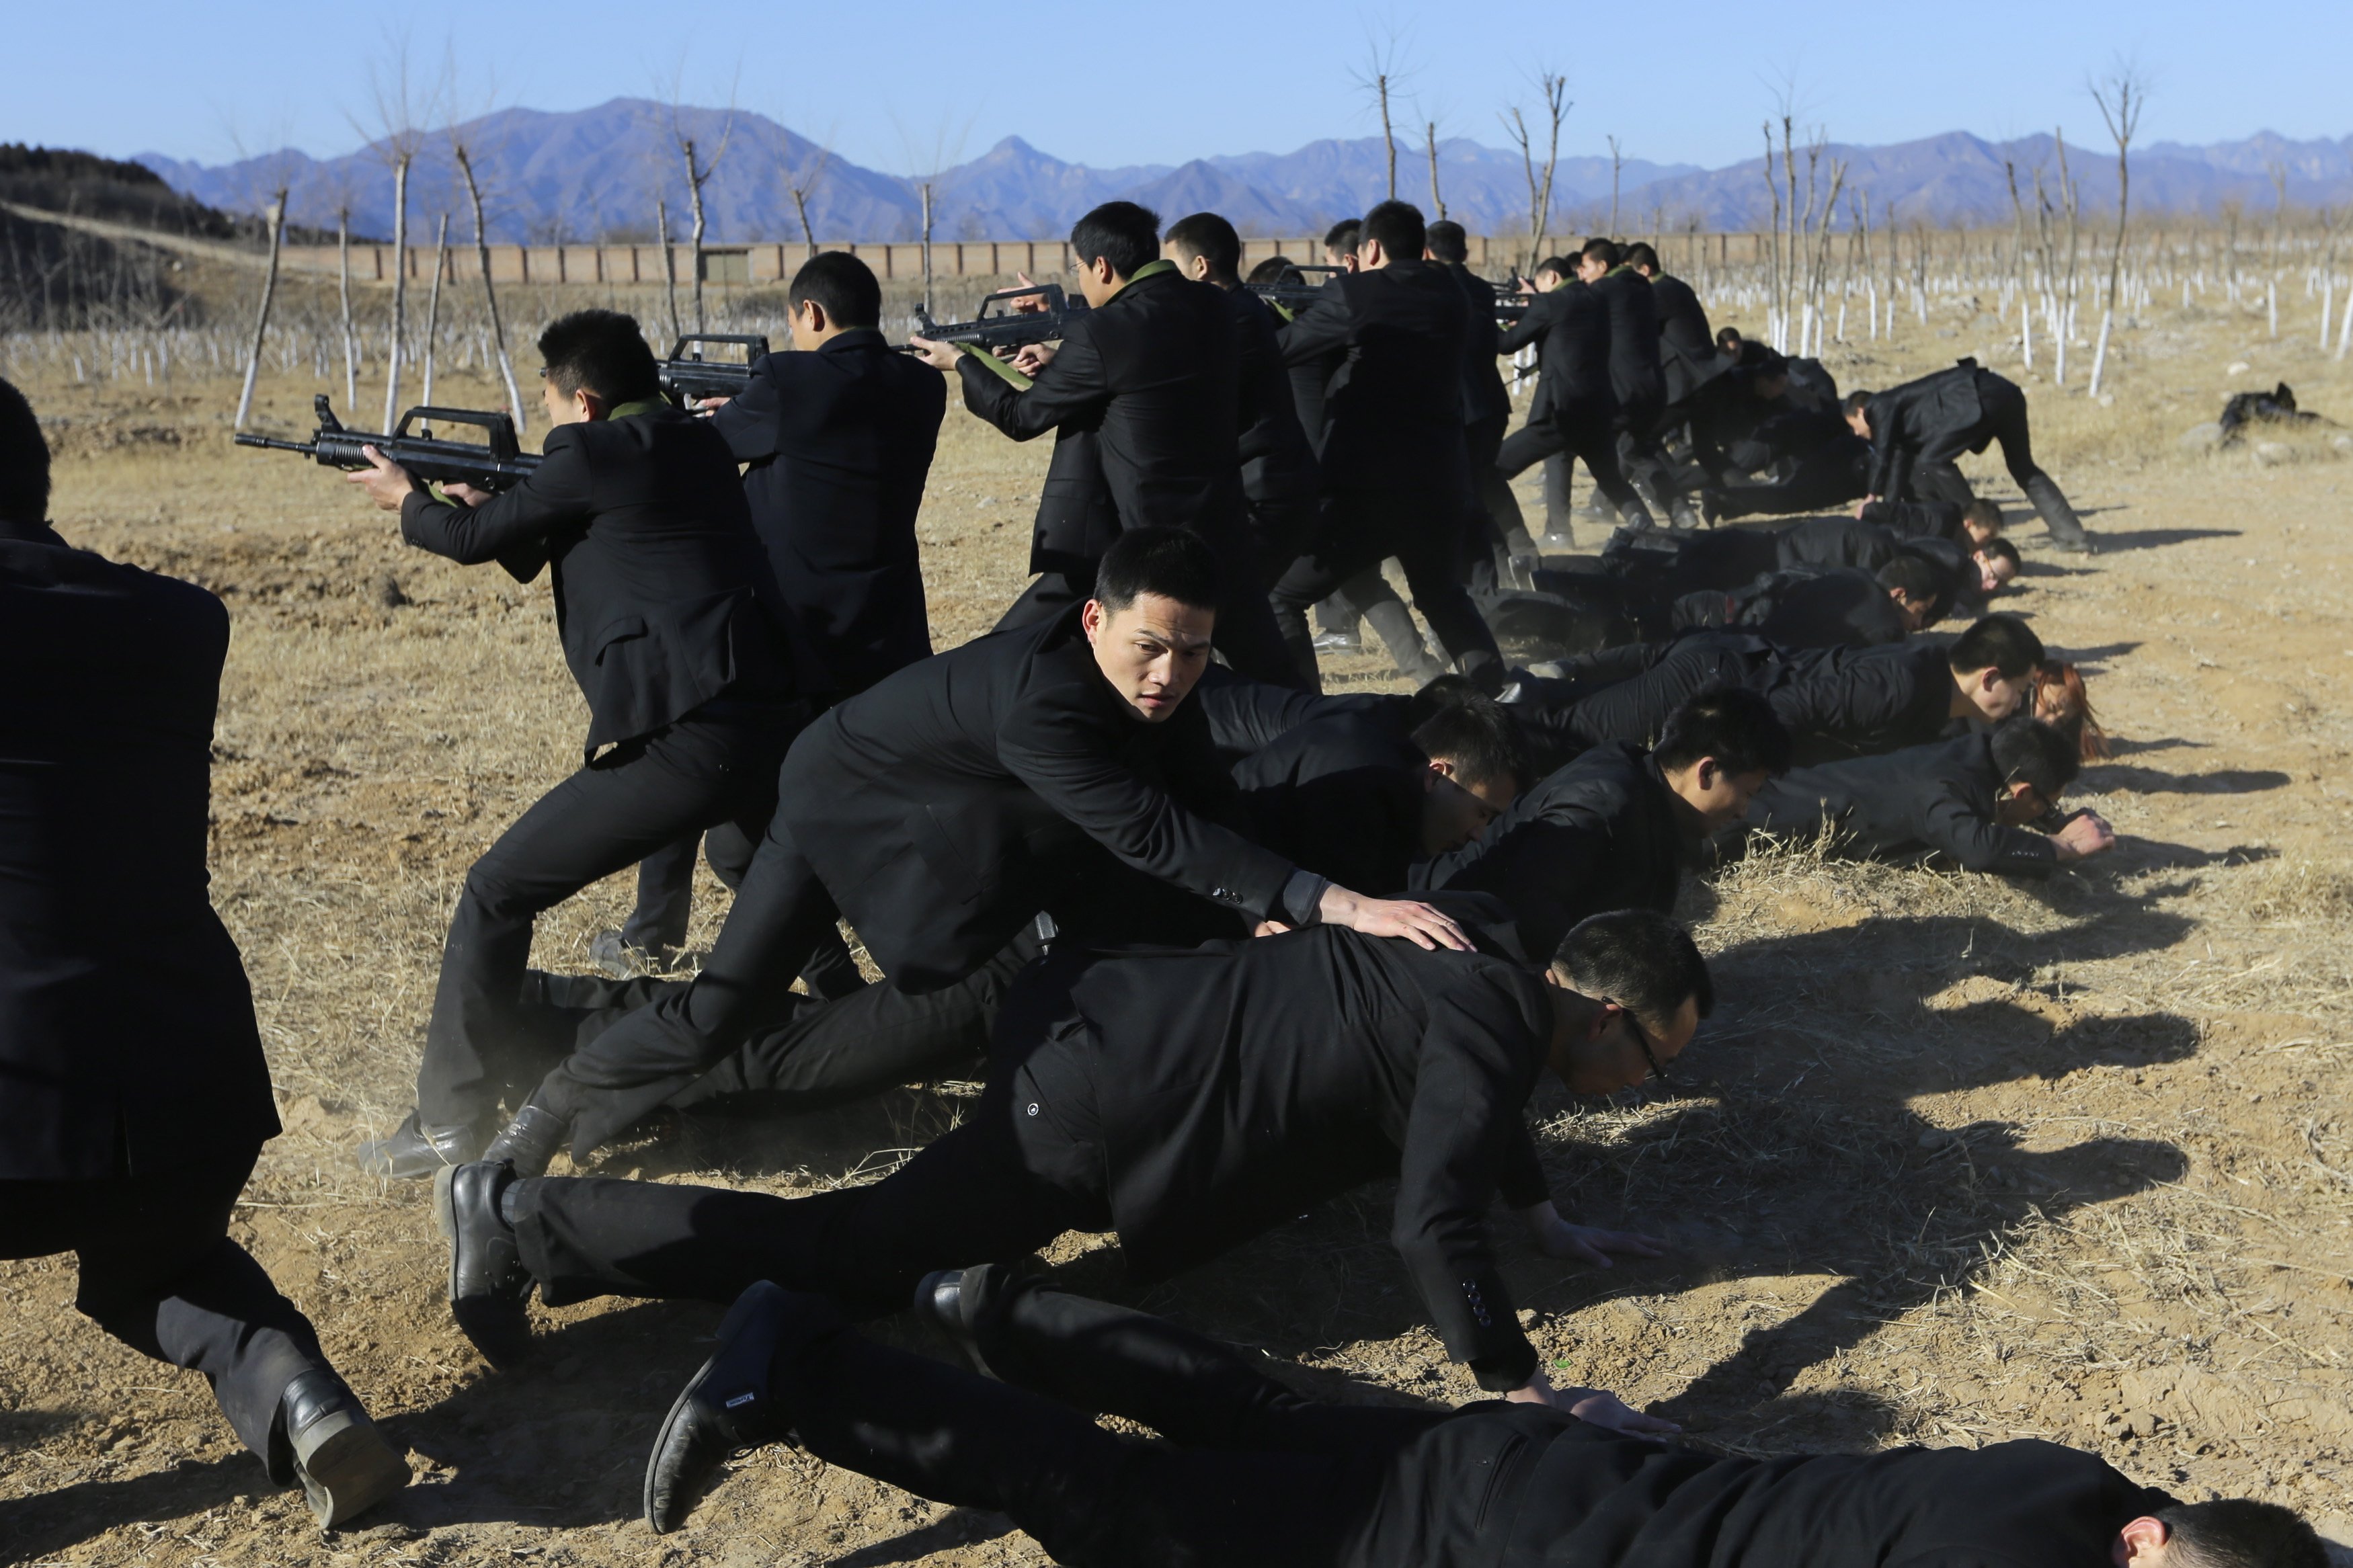 Students holding replica 95 semi-automatic rifles practice protecting their employers at a shooting training field managed by the military during Tianjiao Special Guard Security Consultant training on the outskirts of Beijing December 14, 2013.